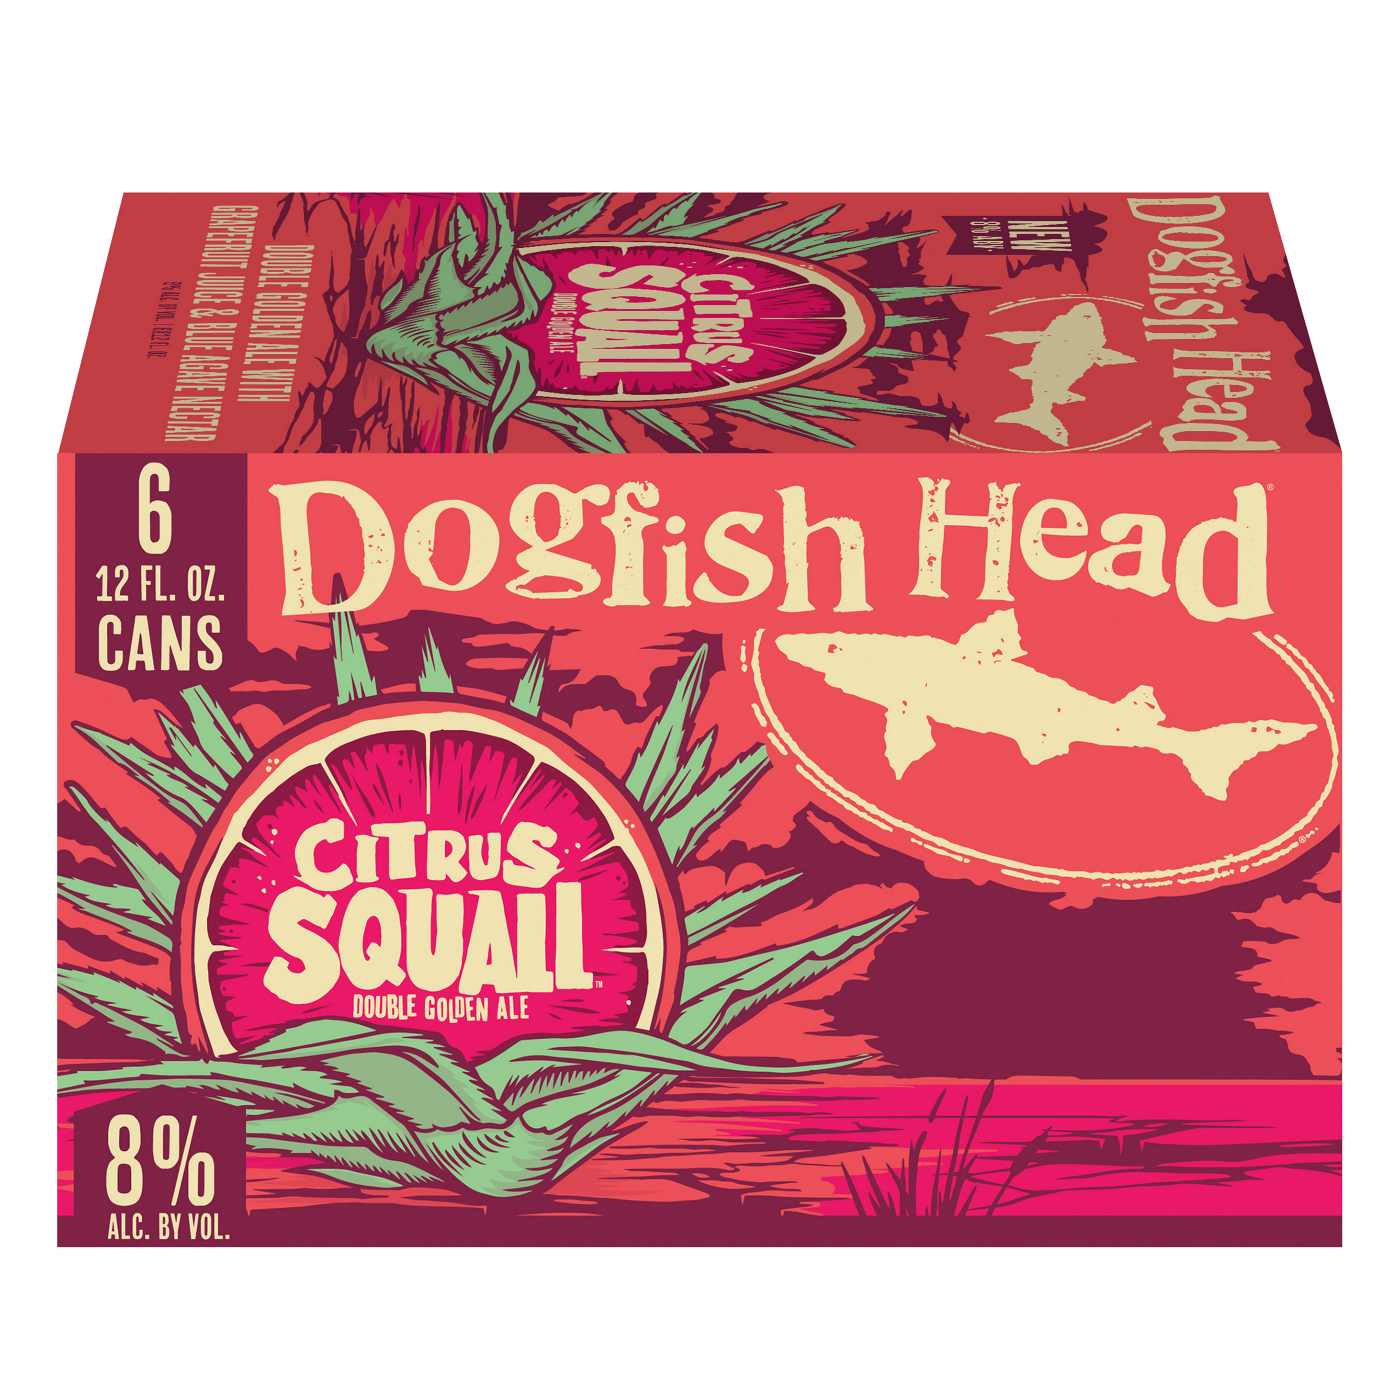 Dogfish Head Citrus Squall Double Golden Ale Beer 6 pk Cans; image 1 of 2